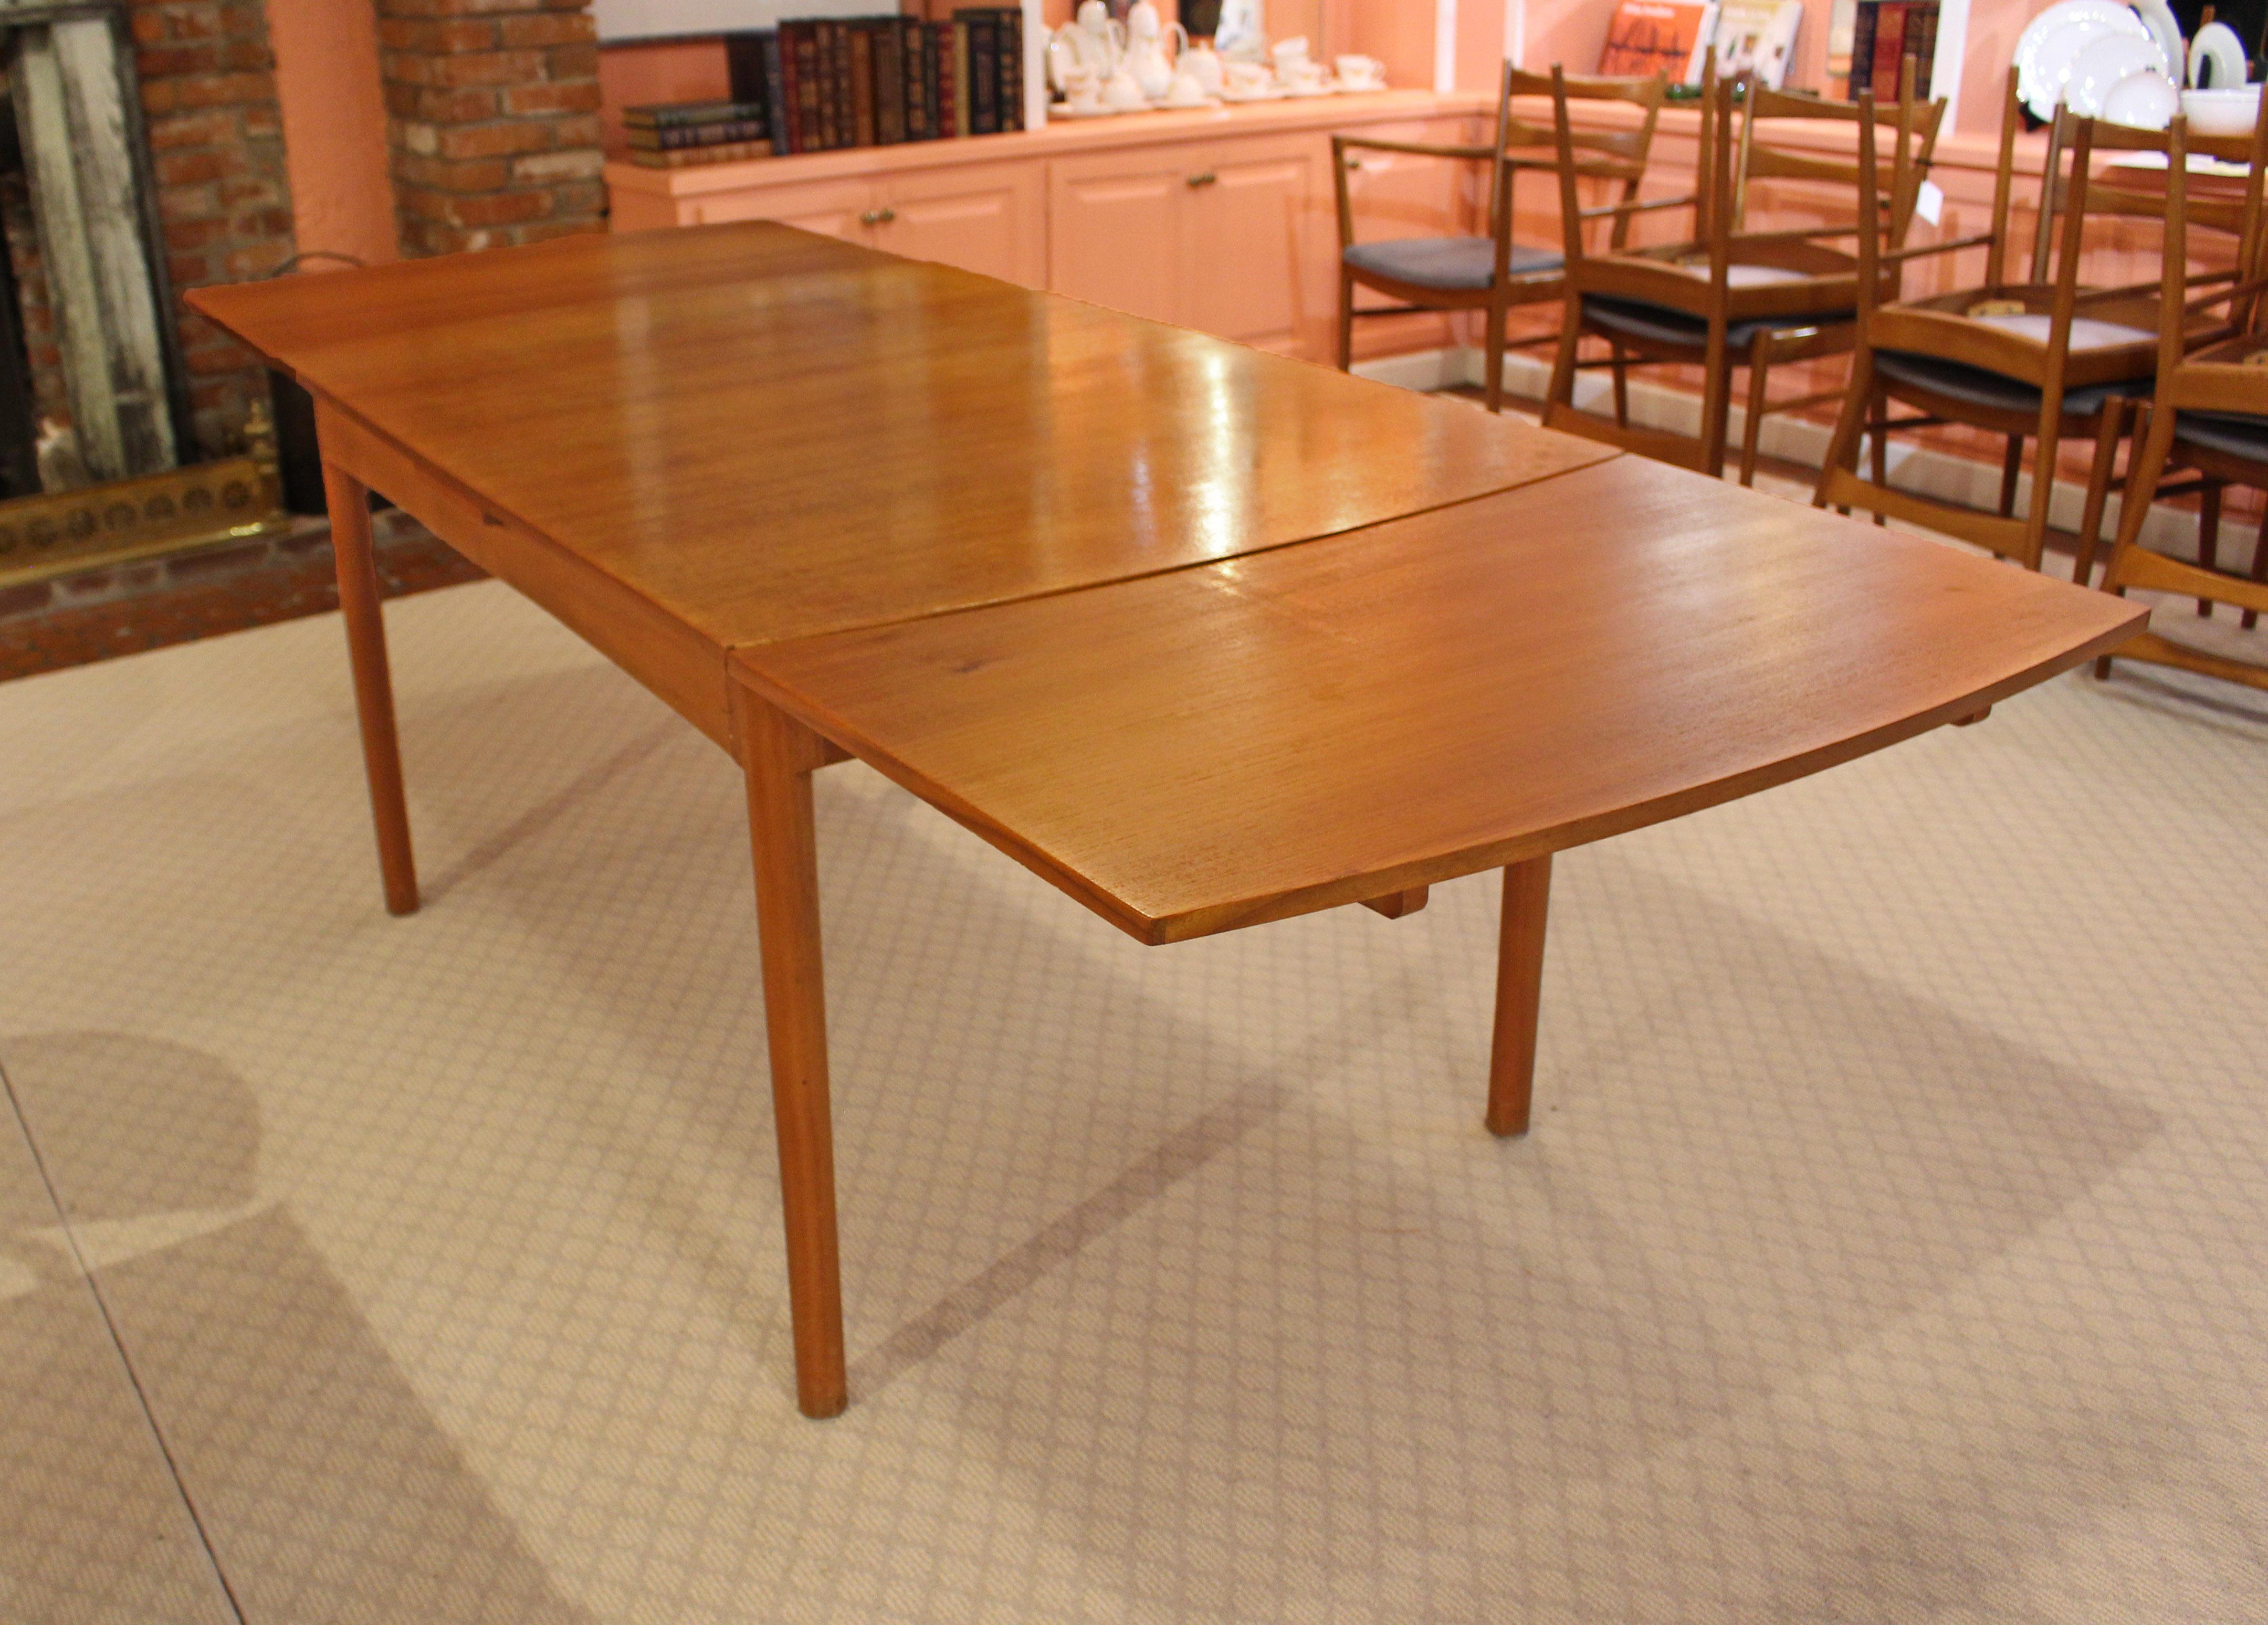 Circa 1970s Mid-Century Modern draw leaf dining table attributed to McIntosh. Made of teak, raised on turned legs. One side rail replaced. Marks & scuffs commensurate with age & use.

Measures: 36